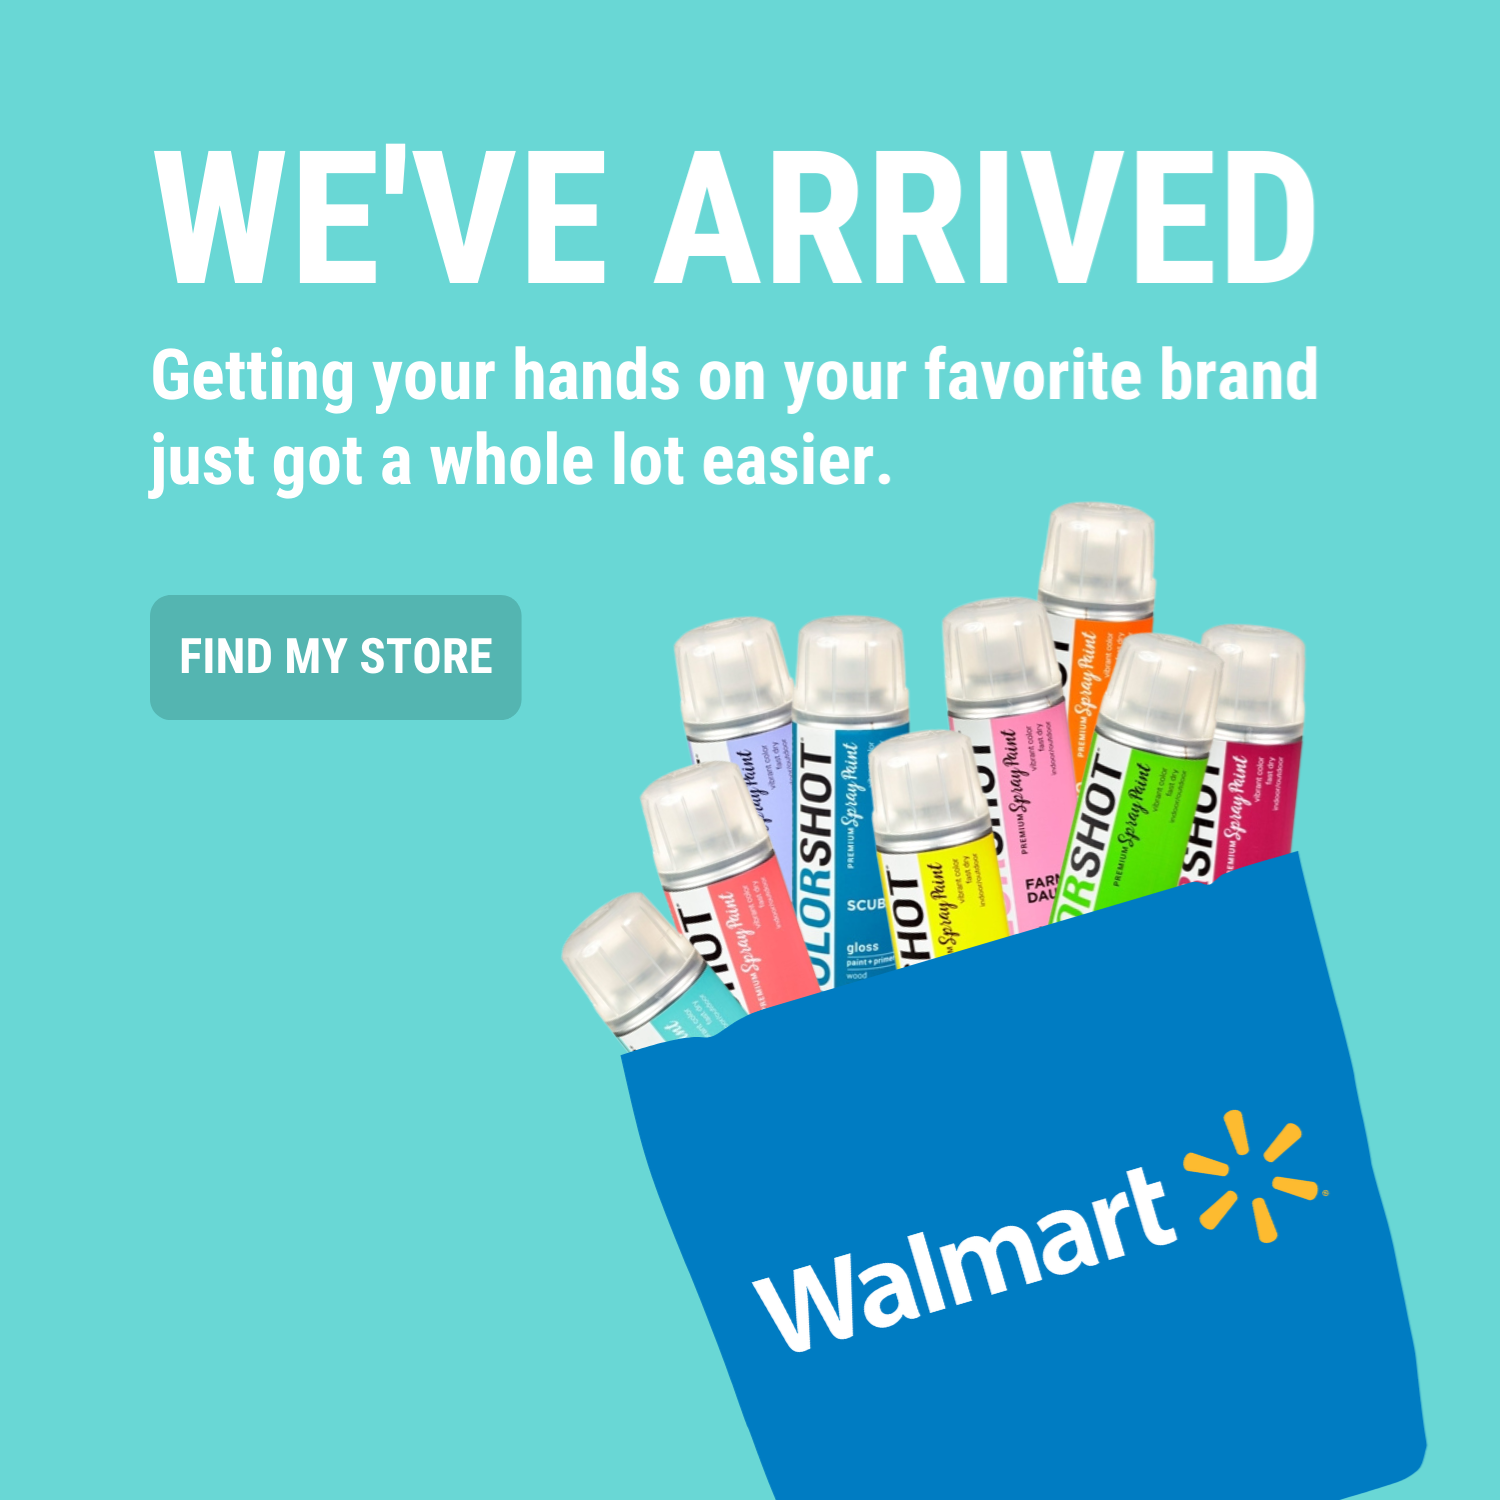 WE'VE ARRIVED  Getting your hands on your favorite brand just got a whole lot easier. We are thrilled to announce that COLORSHOT is now available in select Walmart stores and online at Walmart.com! Click to find your store